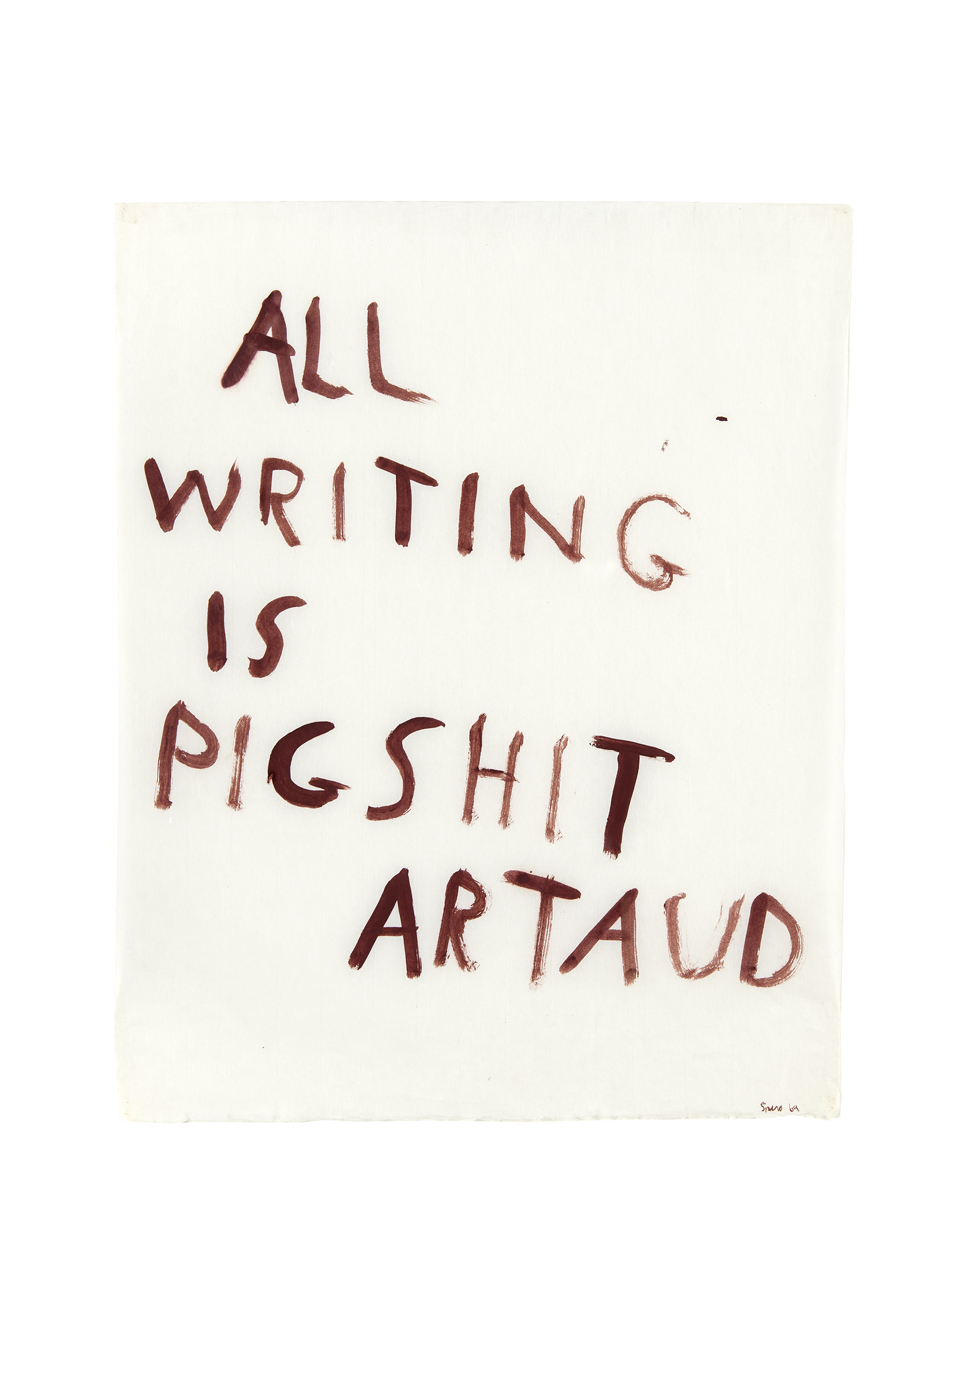 Nancy Spero: "All Writing is Pigshit, Artaud", 1969, Courtesy of the Artist